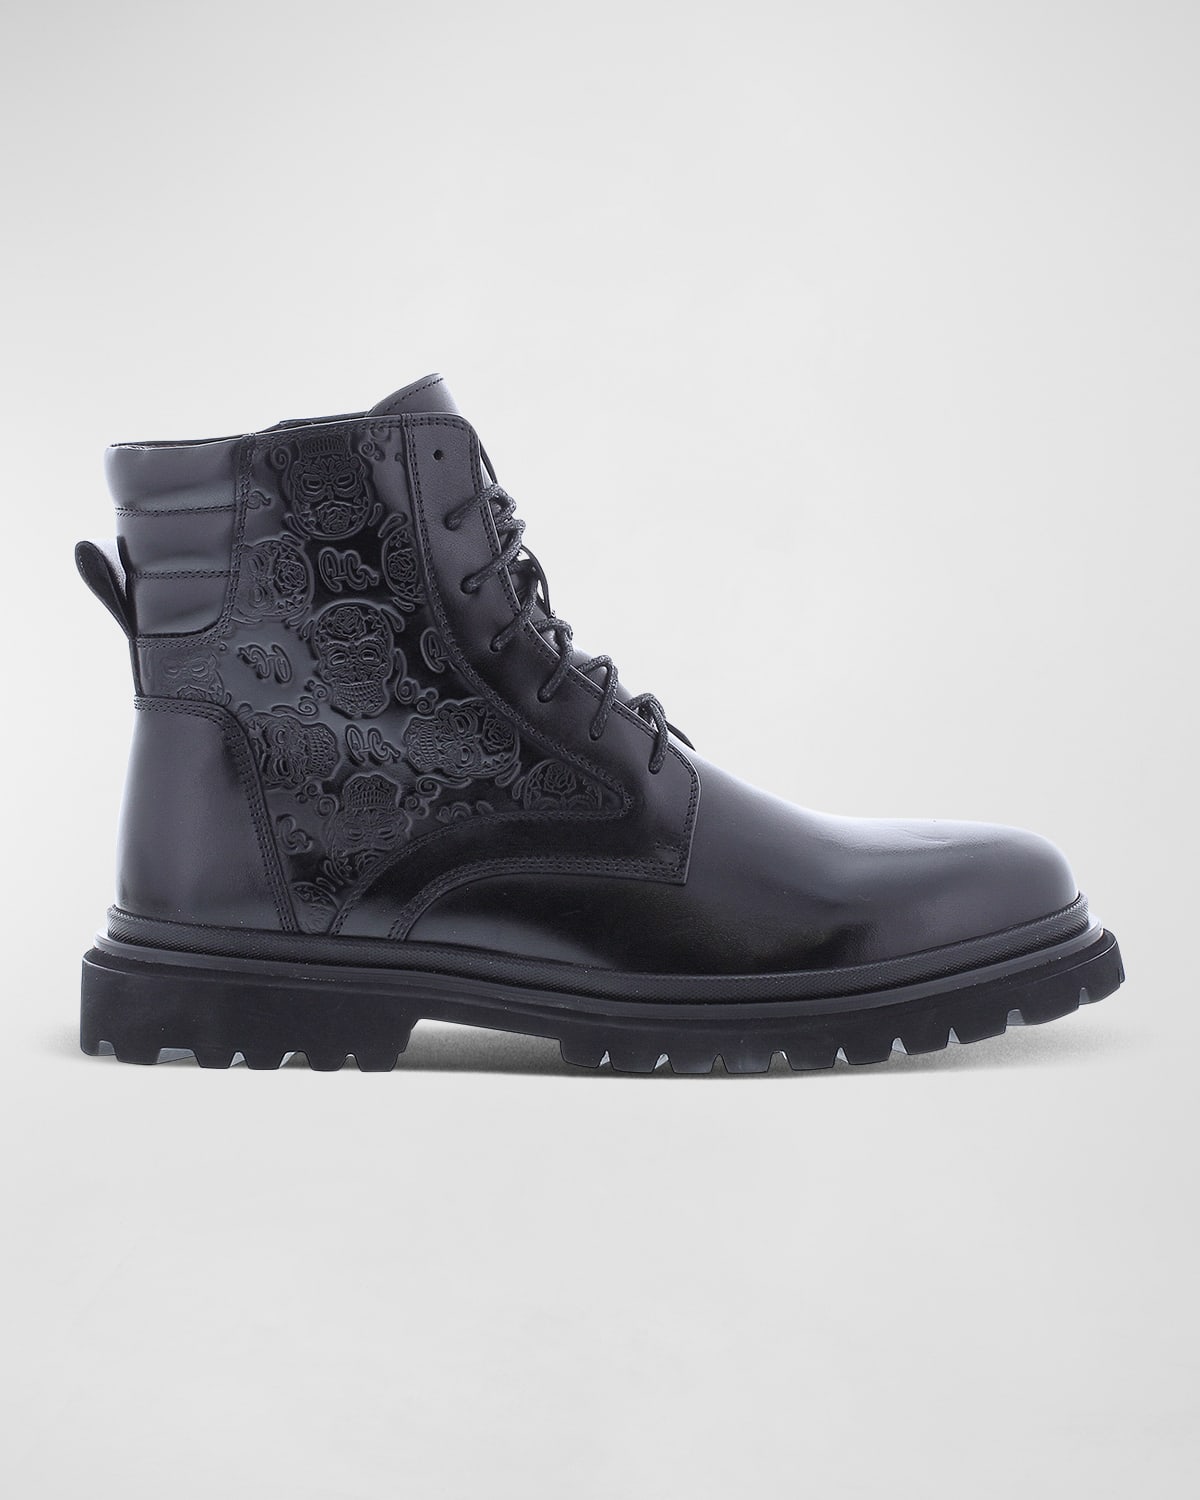 Men's Geneva Embossed Leather Lace-Up Boots